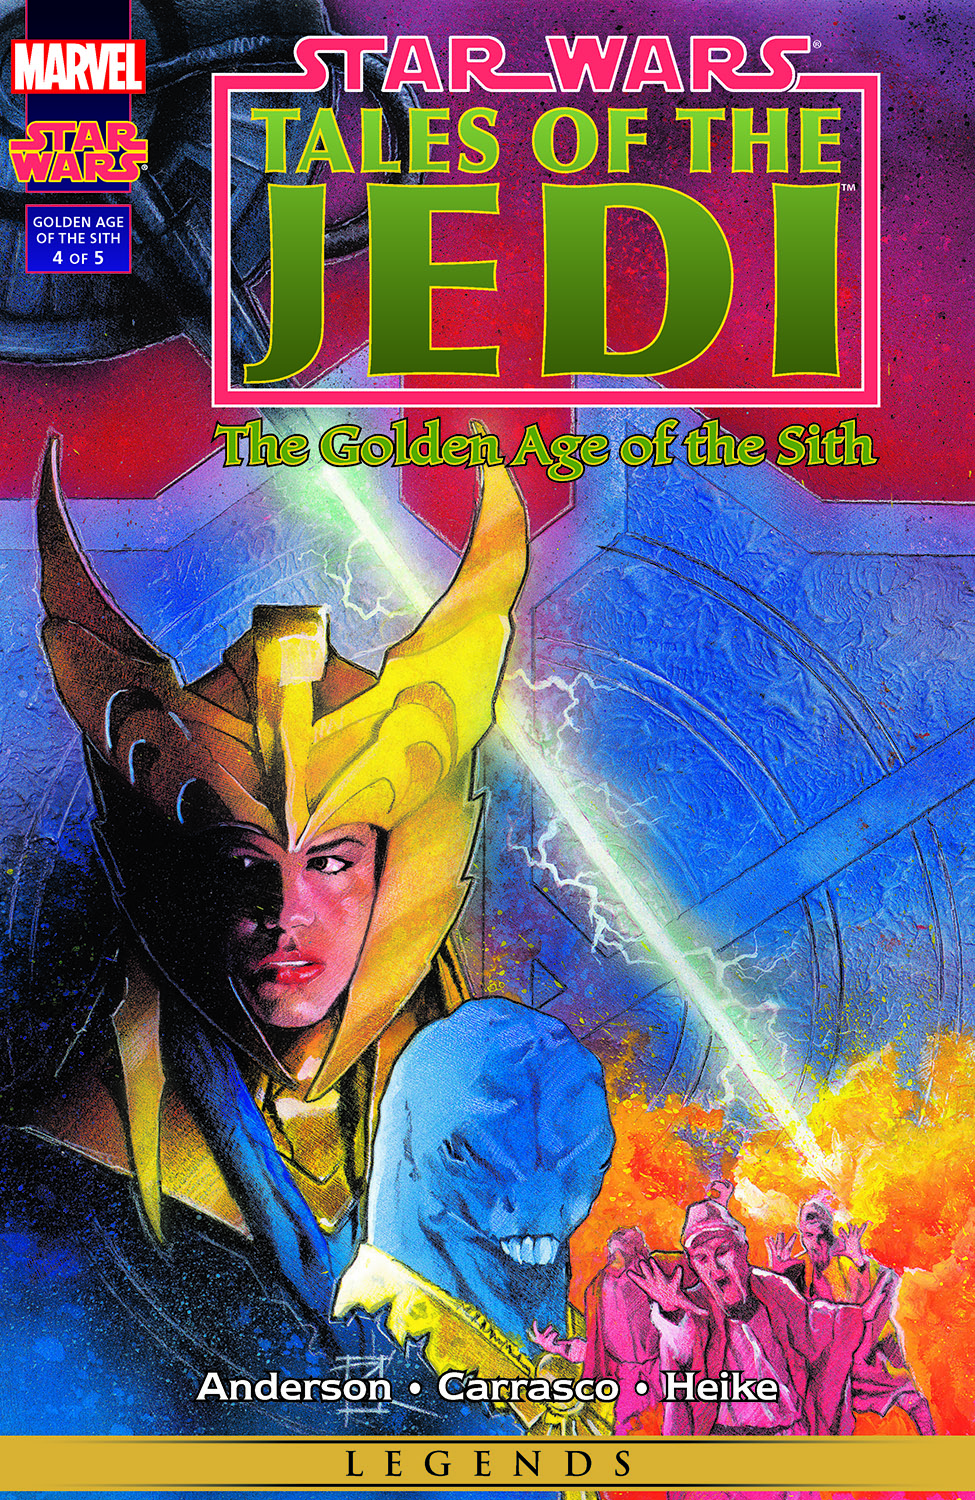 Star Wars: Tales of the Jedi - The Golden Age of the Sith (1996) #4